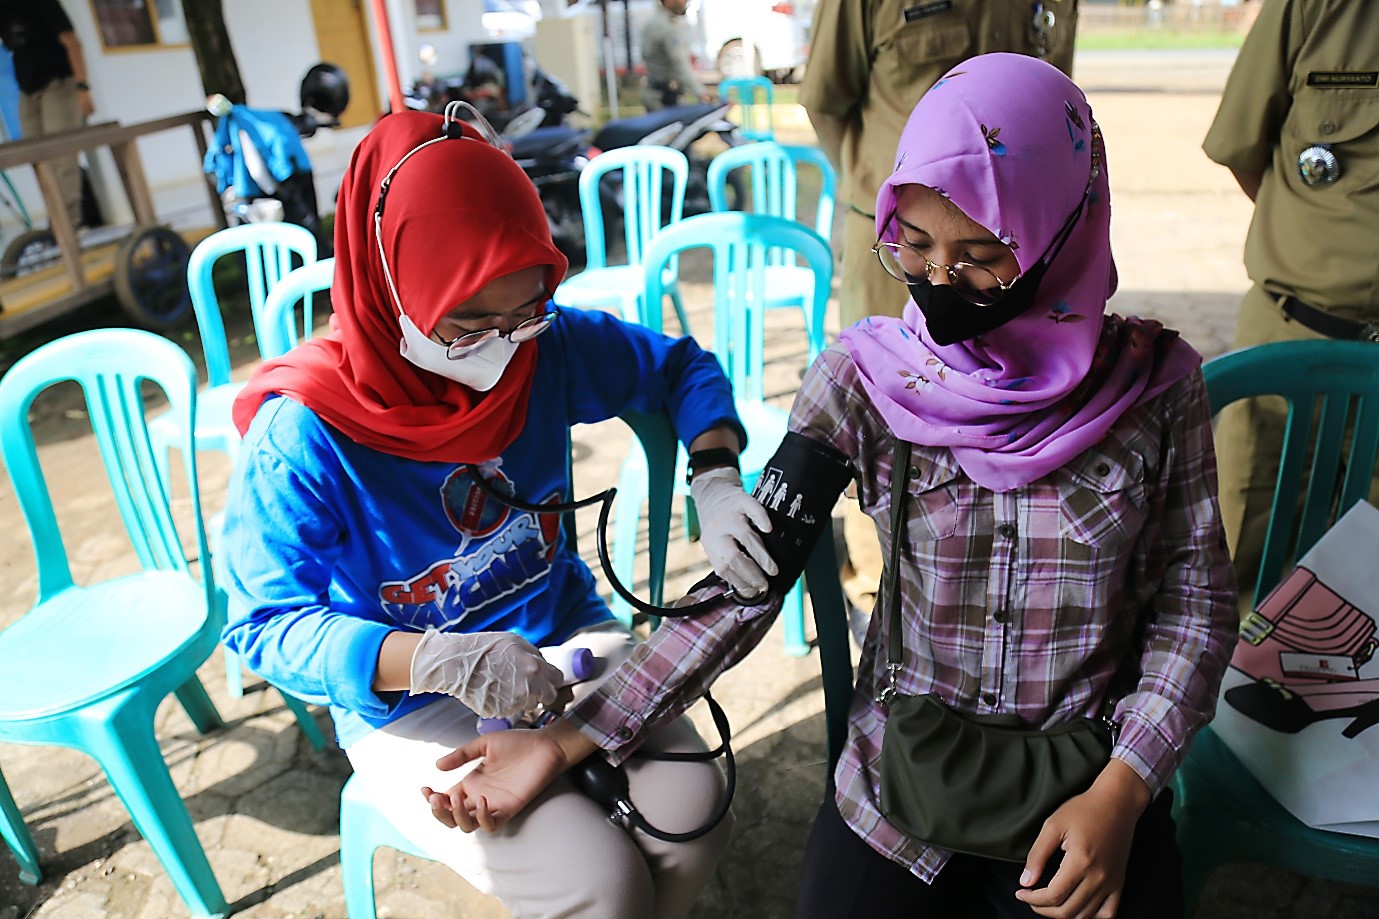 A health worker checks the blood pressure of Siti Mustabsyiroh at the Tayukulon Village Head Office. Siti recently had a heart surgery that made her currently ineligible for vaccination (photo by: AIHSP Documentation Team)